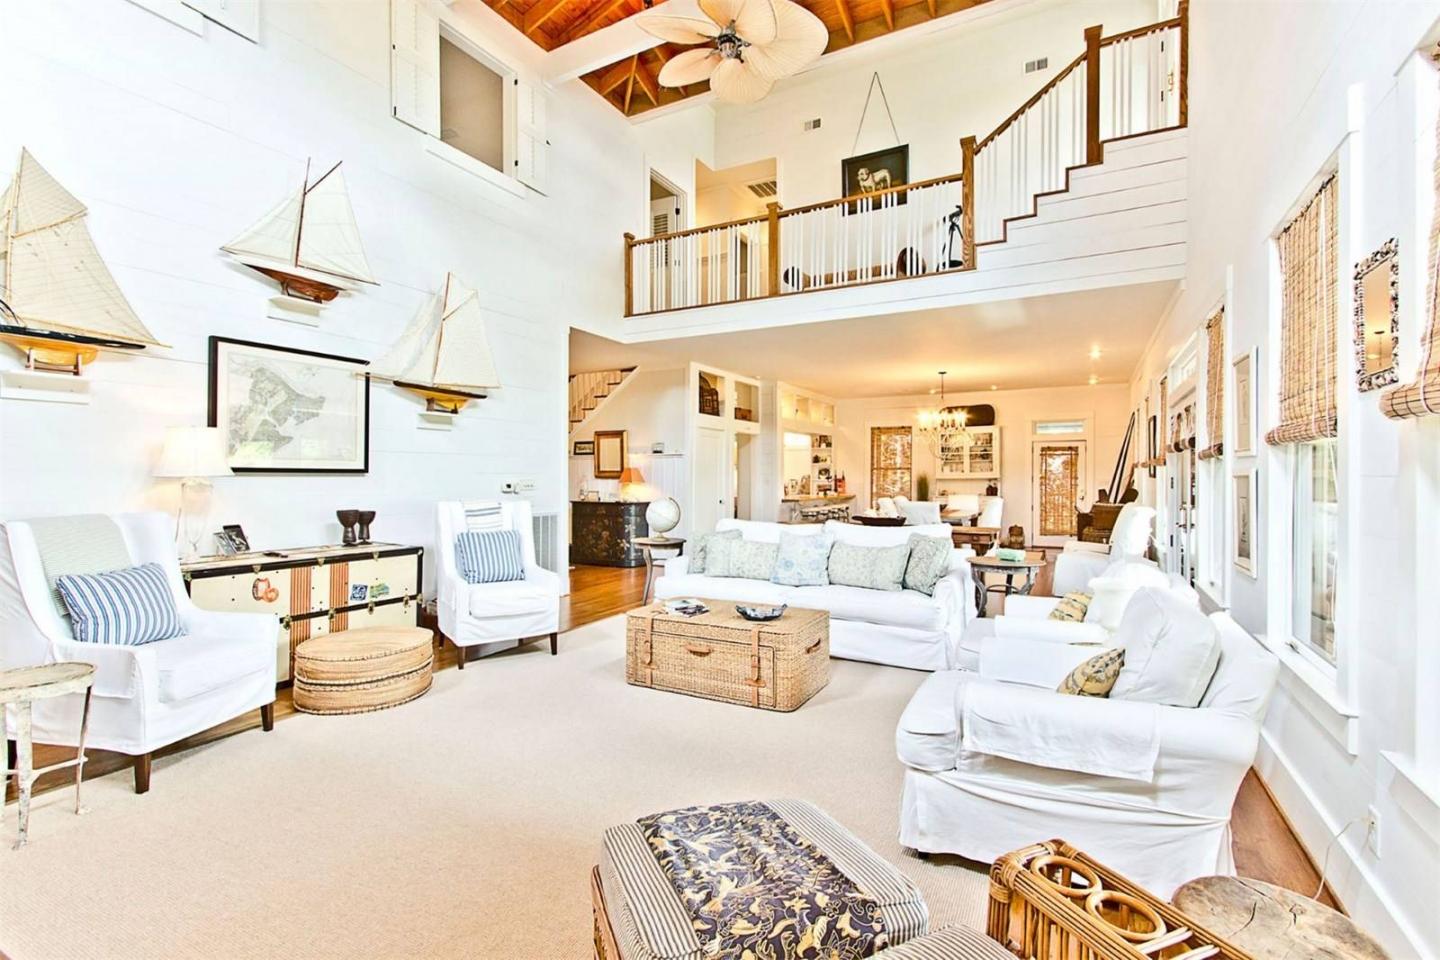 Breezy, airy aesthetics govern the home's interiors complete with wooden accents, wicker furniture and marina memorabilla 